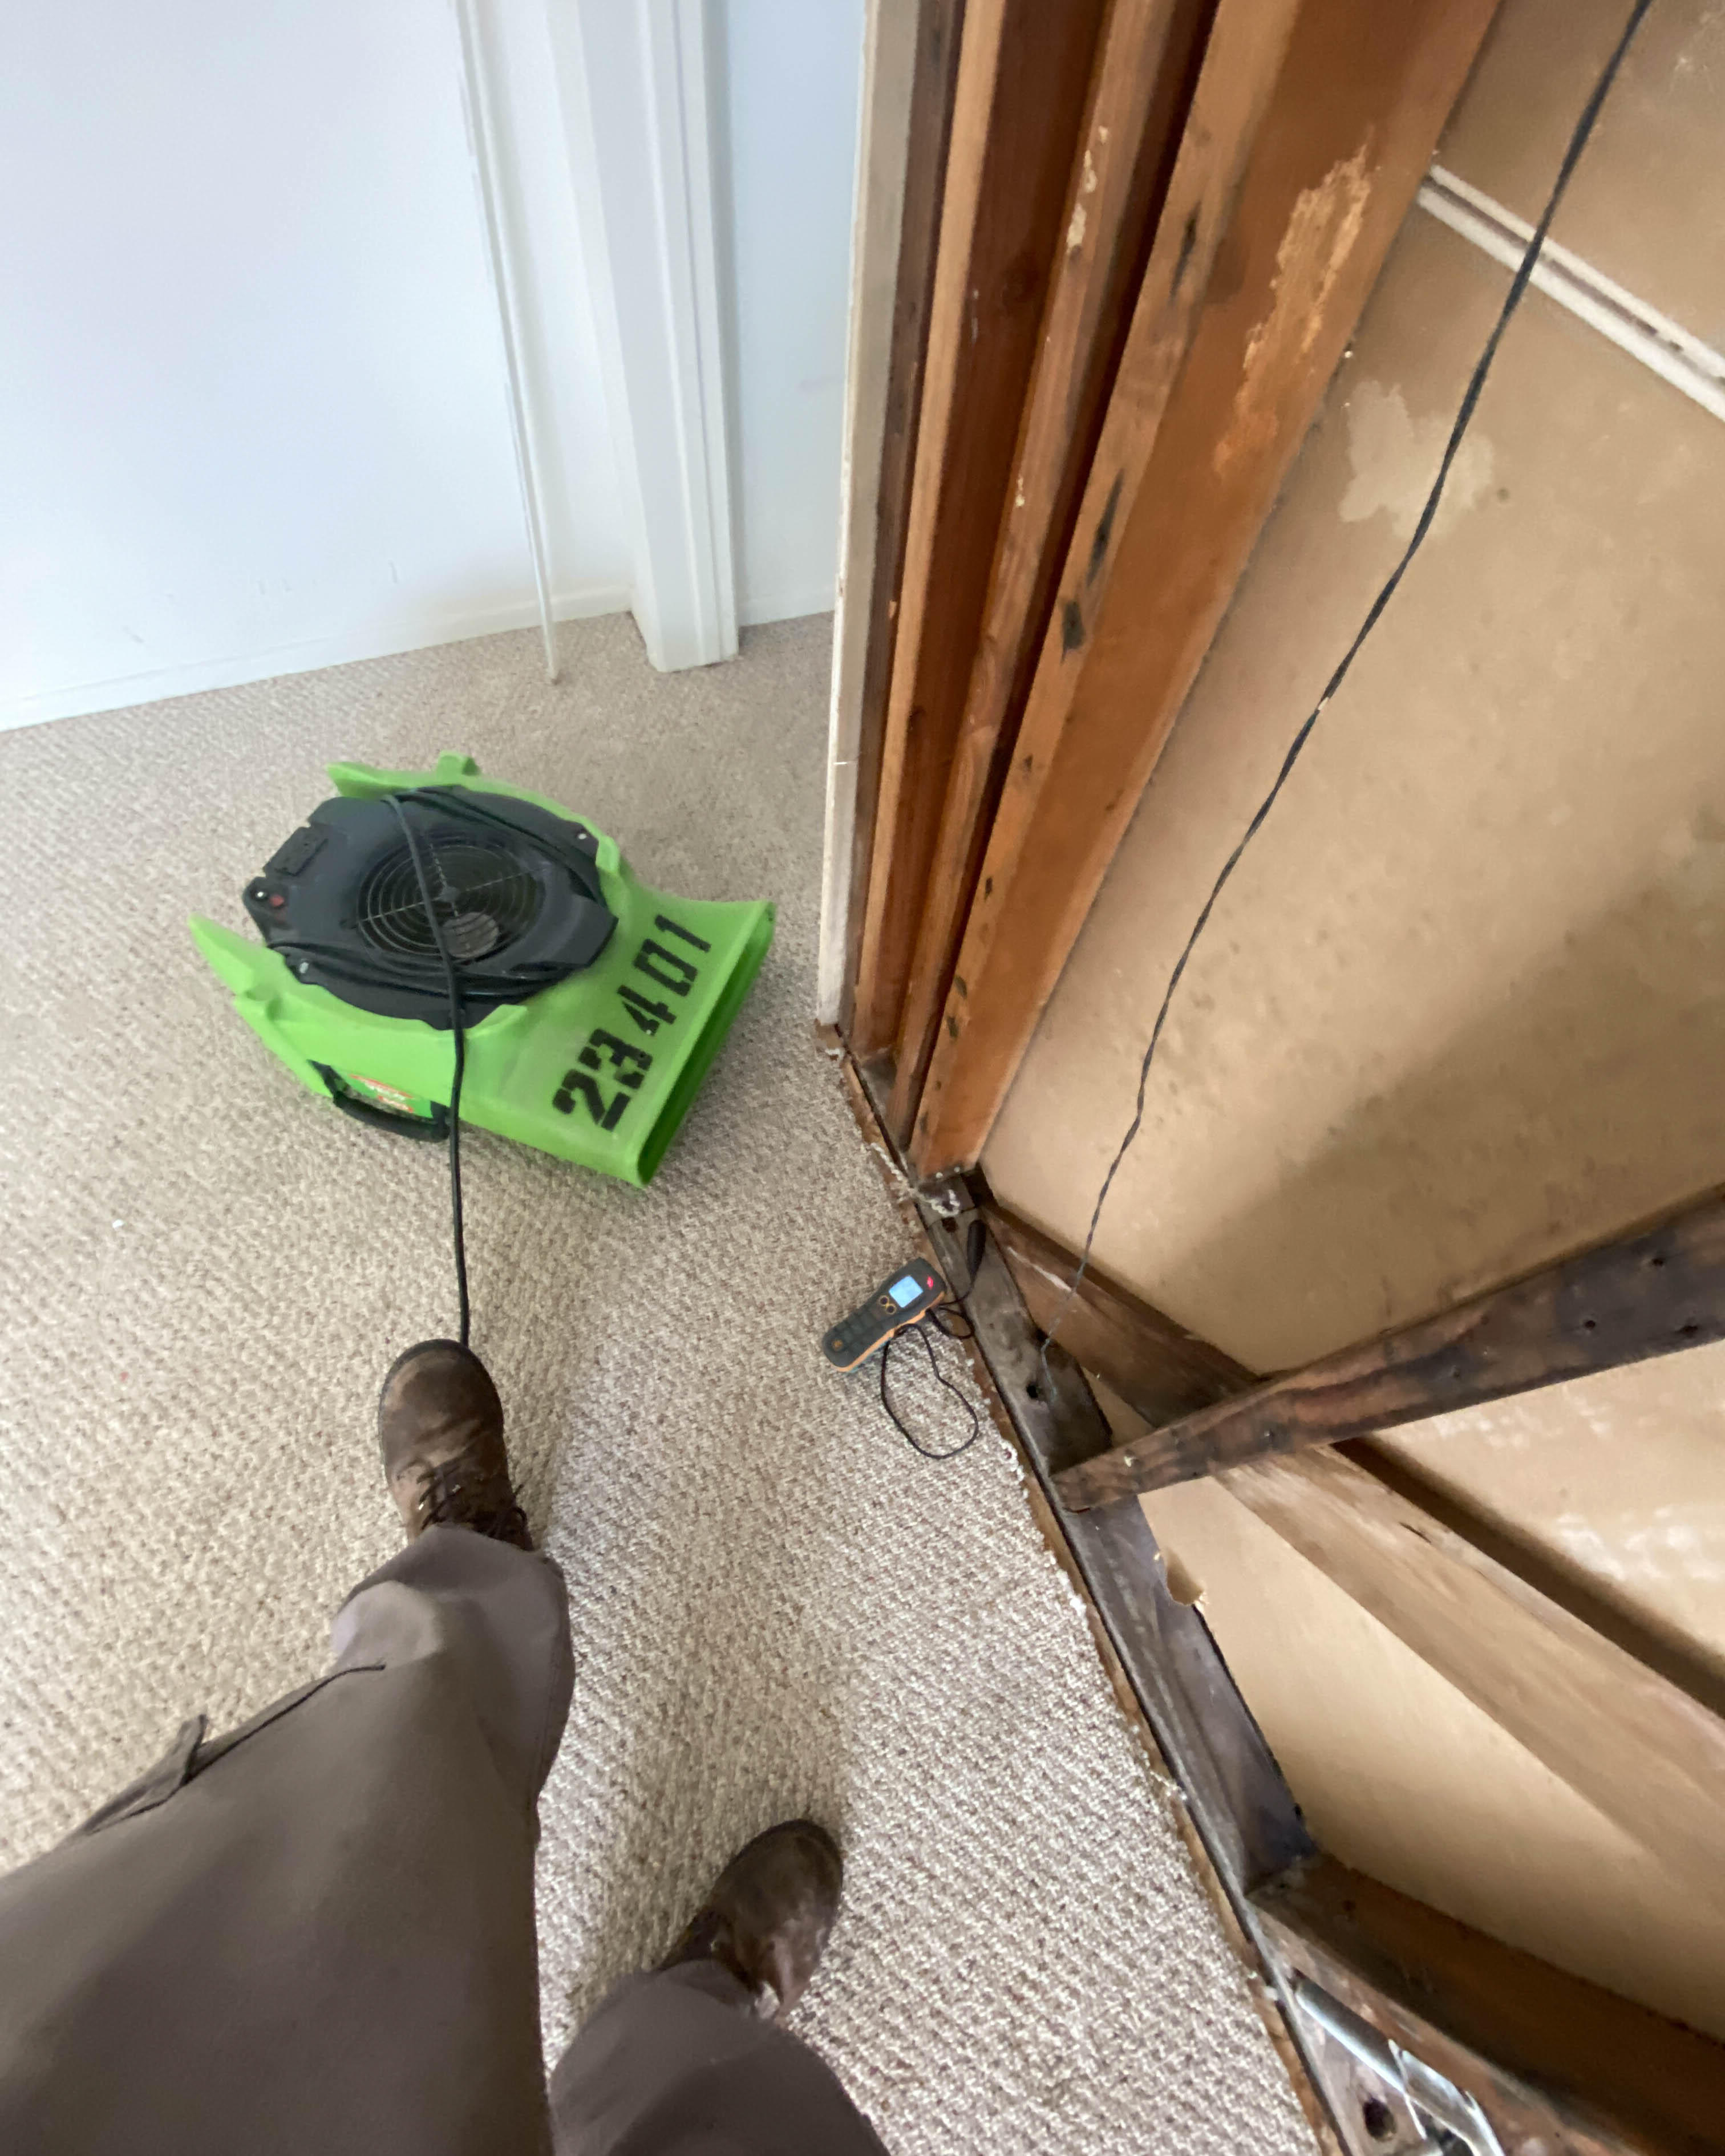 When disaster strikes, we're here to help. SERVPRO's skilled technicians use advanced equipment and techniques to restore your property in Anaheim Resort, CA to pre-damage condition. Give us a call for professional help!